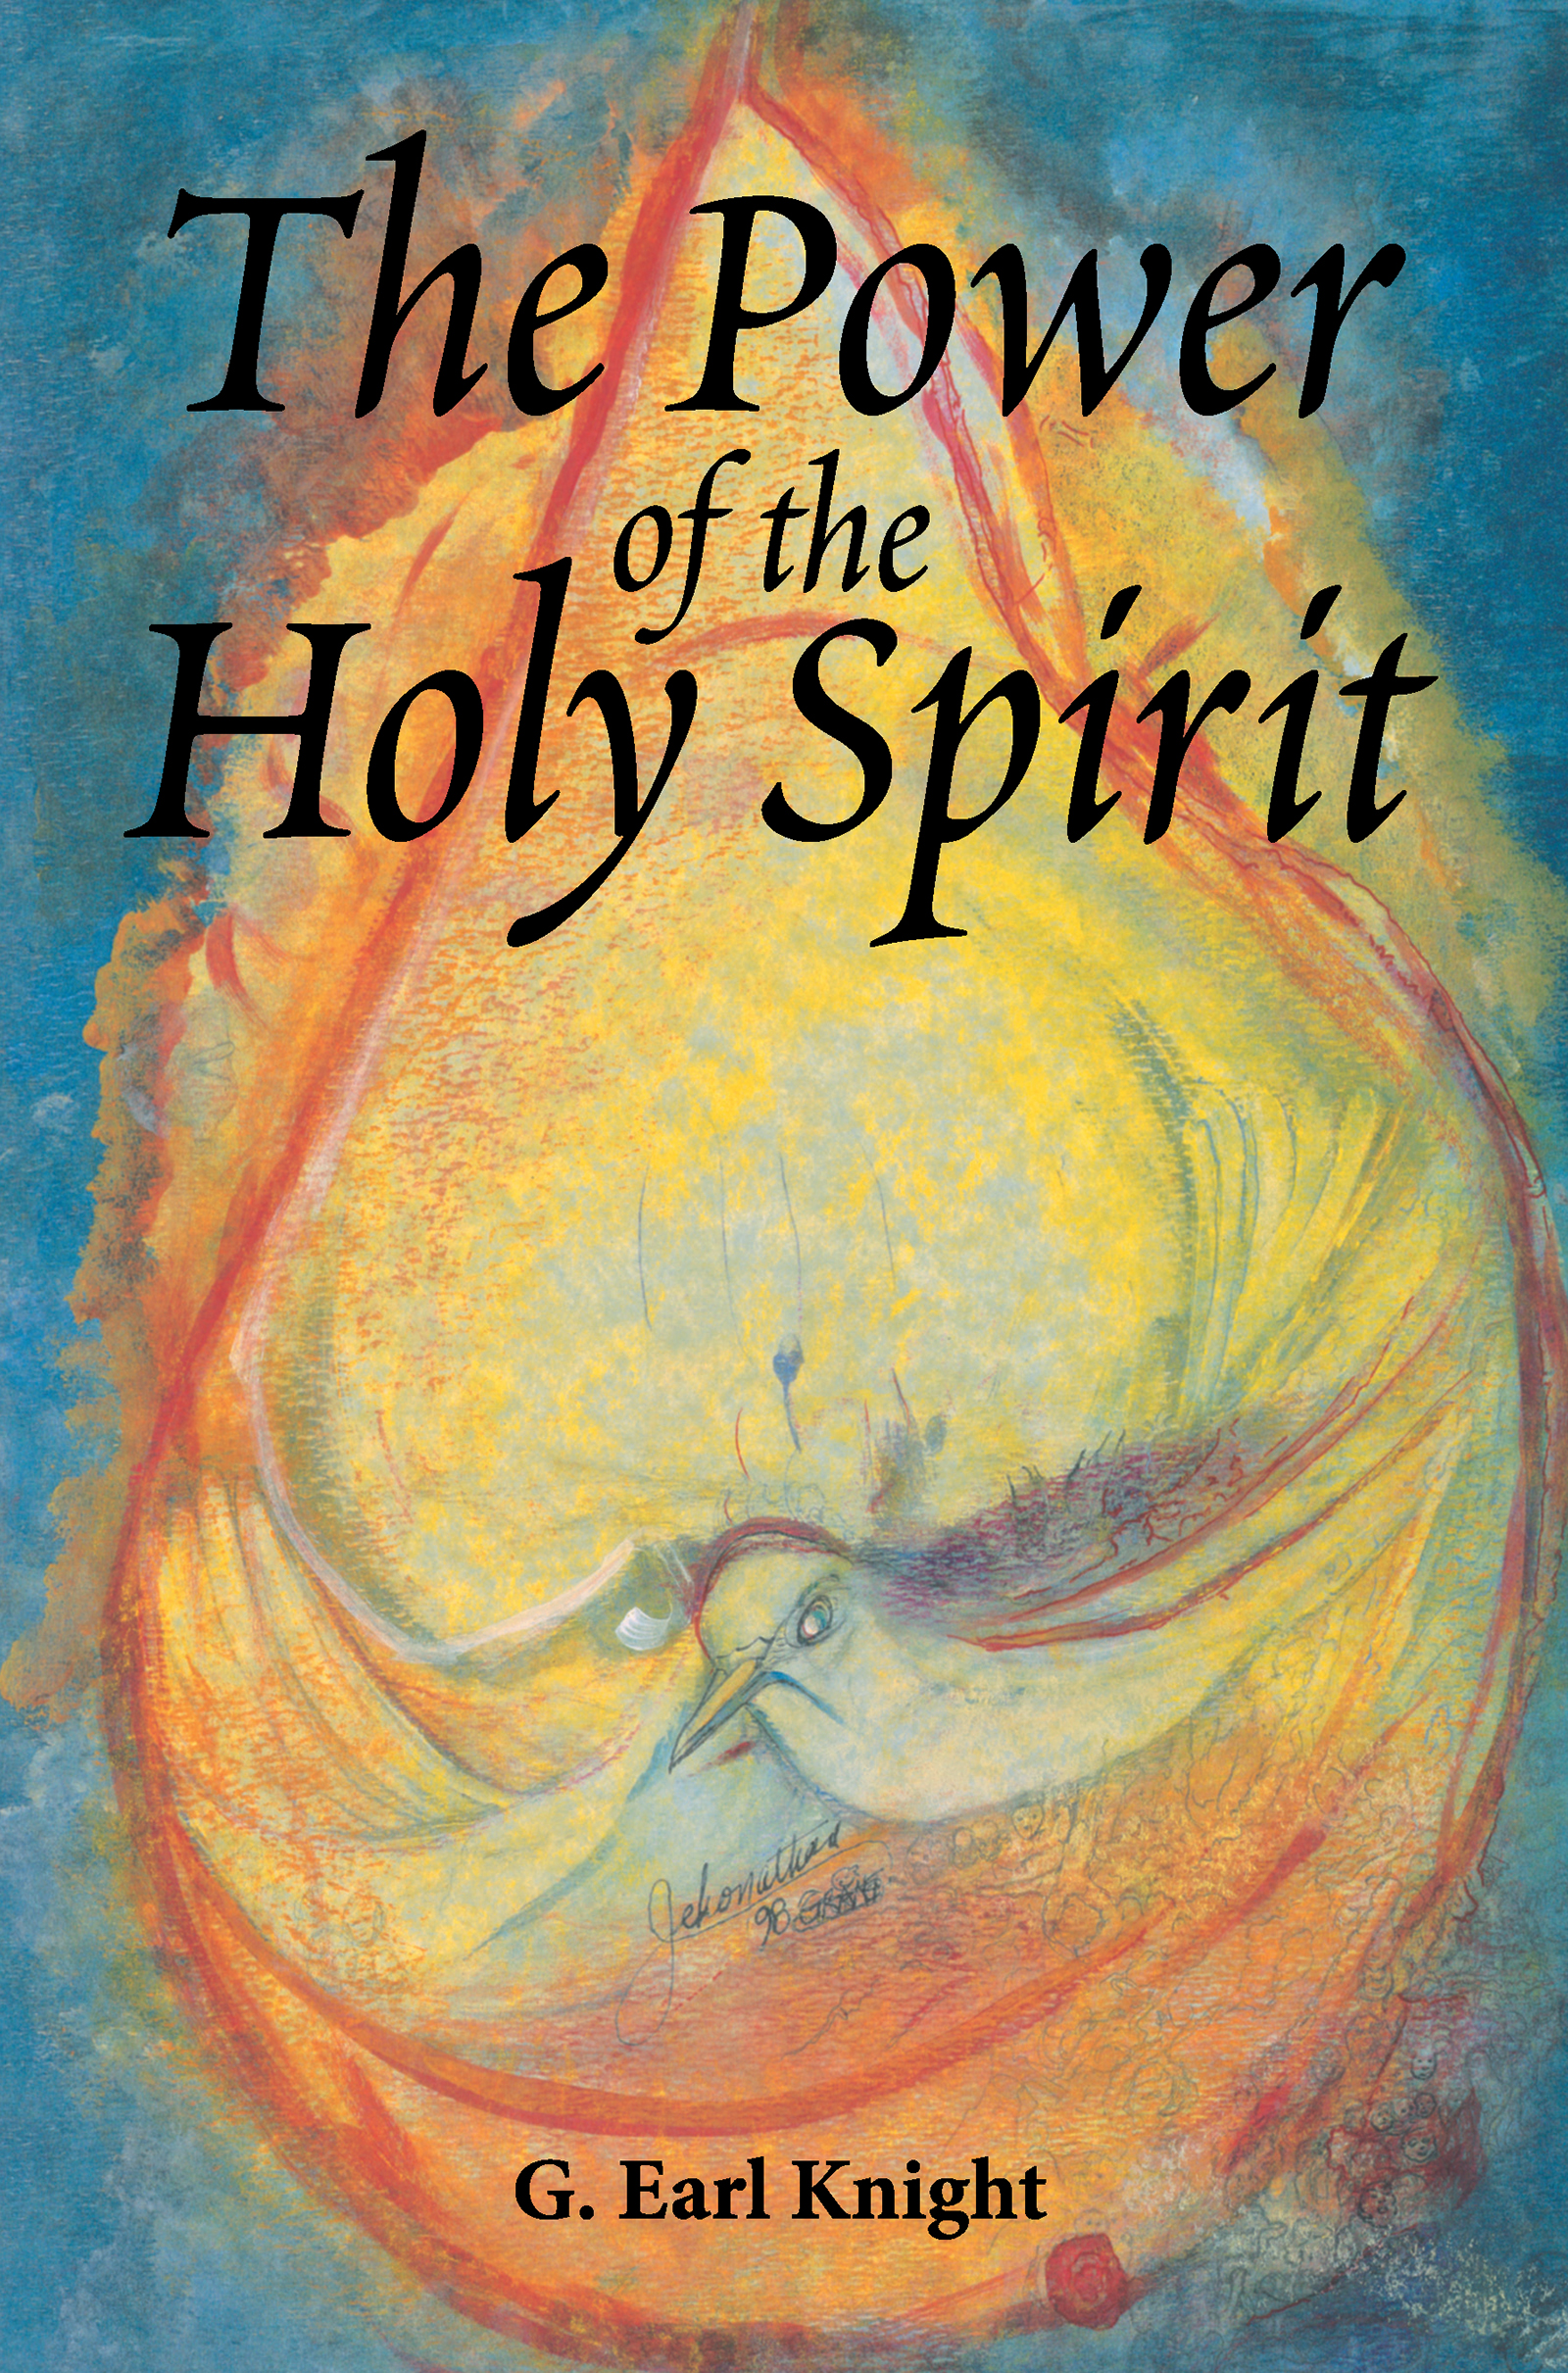 Available Now, THE POWER OF THE HOLY SPIRIT! TEACH Services, Inc.